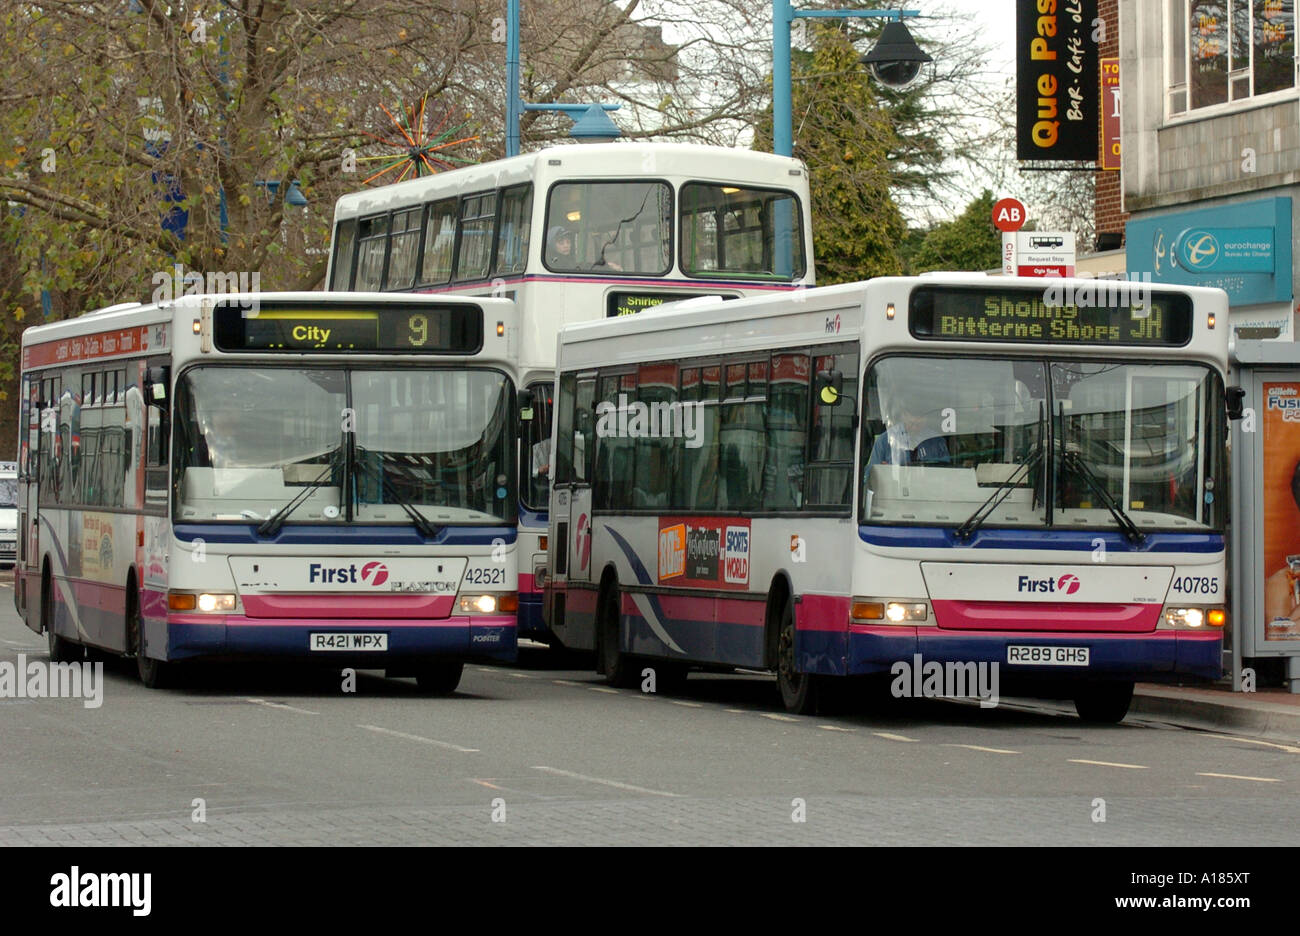 Three Firstbus buses pictured in Southampton, Hampshire, UK Stock Photo